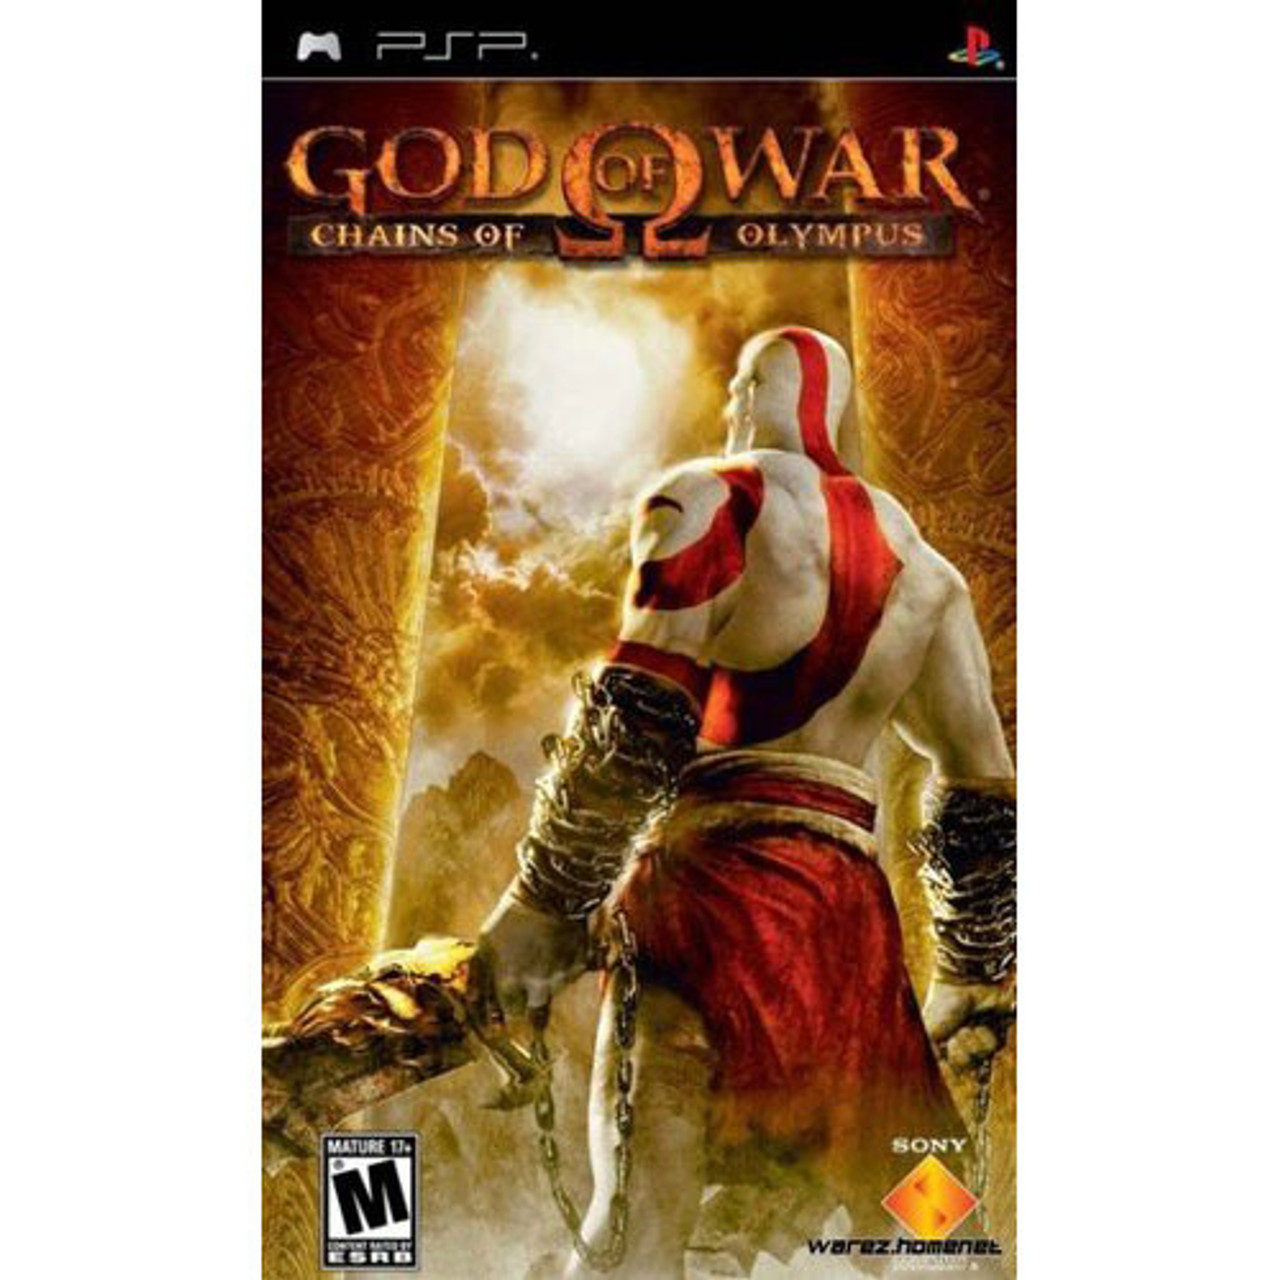 God of War Chains of Olympus demo disc - sealed